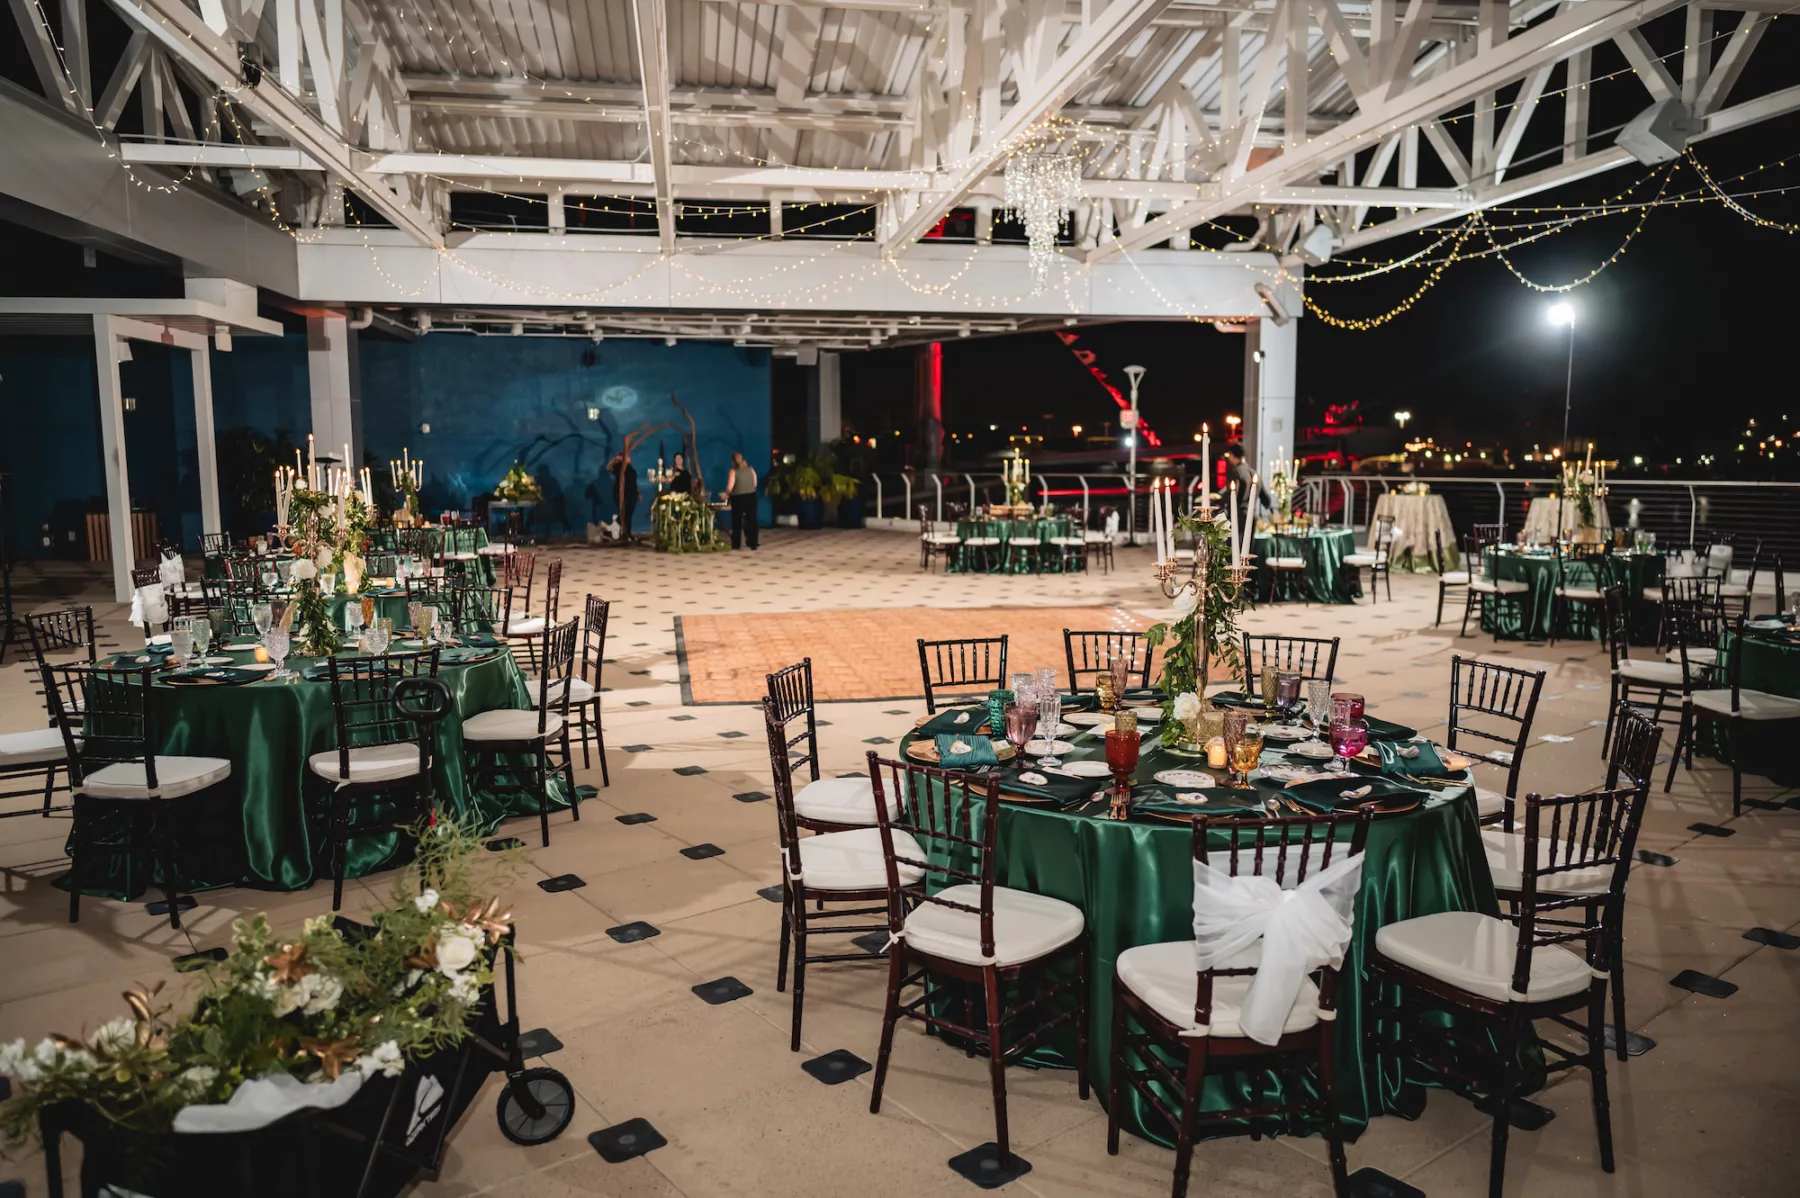 Rooftop Terrace Nautical Emerald Green Wedding Reception Inspiration | Mahogany Chiavari Chairs | Gold Candelabra with White Roses and Greenery | Tampa Bay Outside The Box Event Rentals | Florist Lemon Drops | Venue The Florida Aquarium | Planner Breezin Weddings